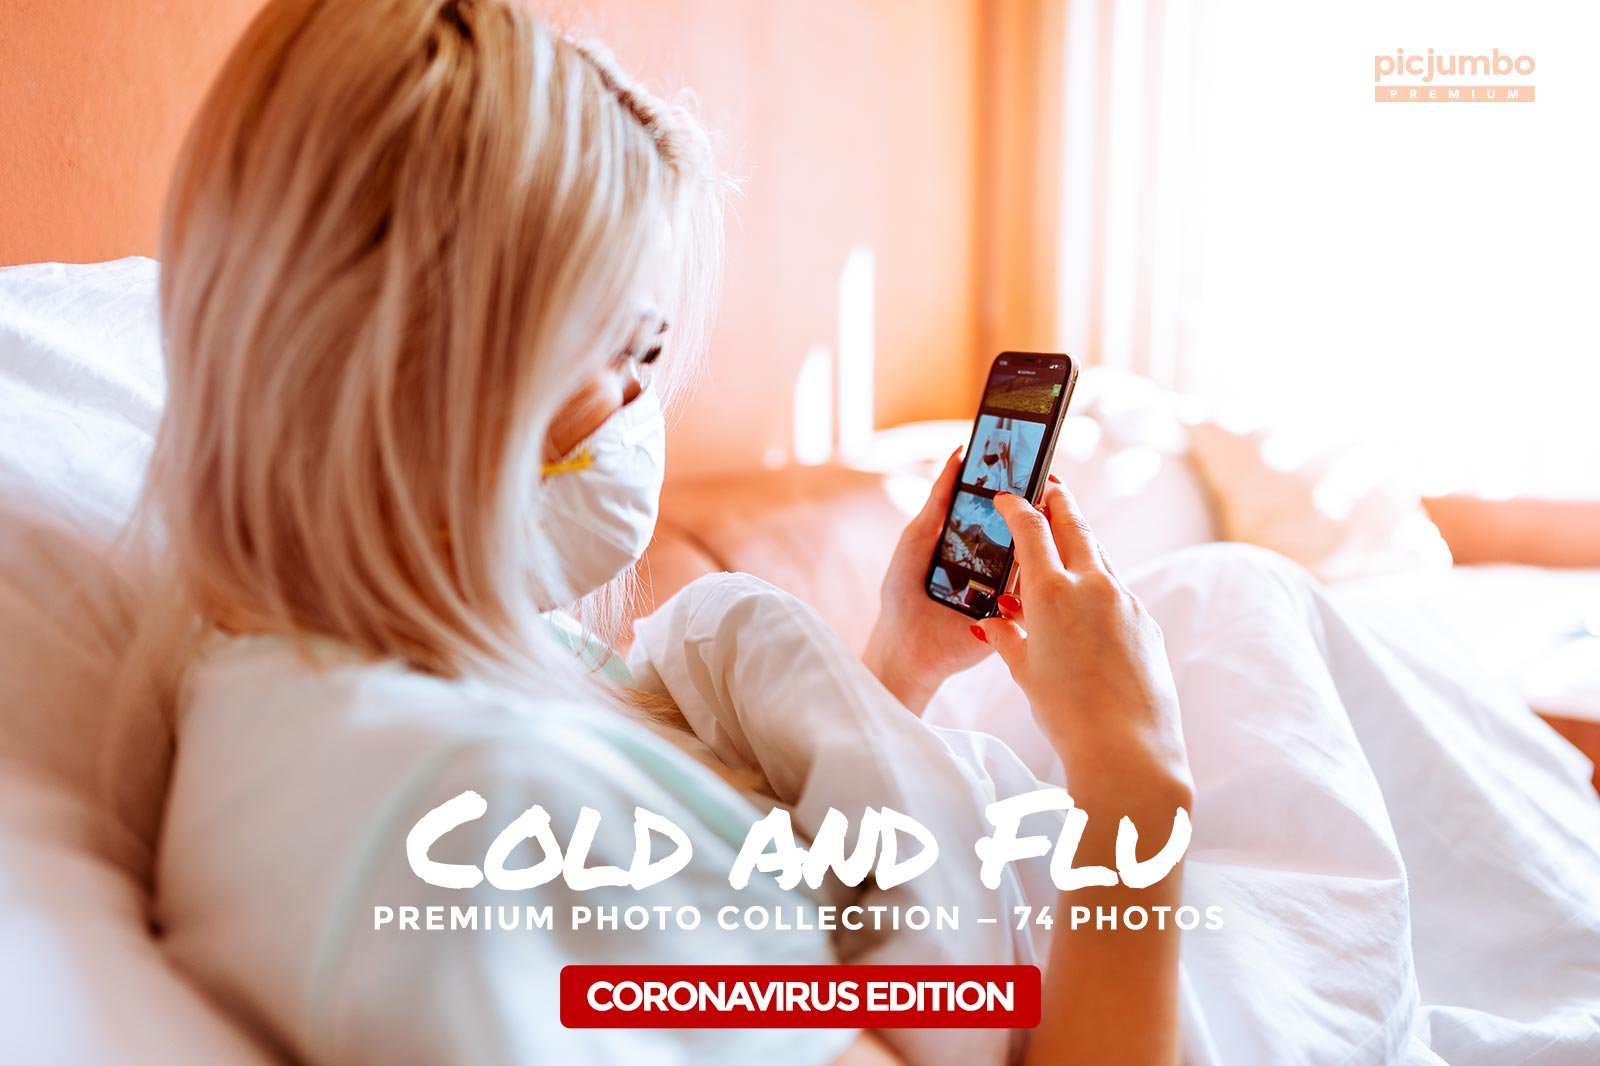 Download hi-res stock photos from our Cold and Flu PREMIUM Collection!